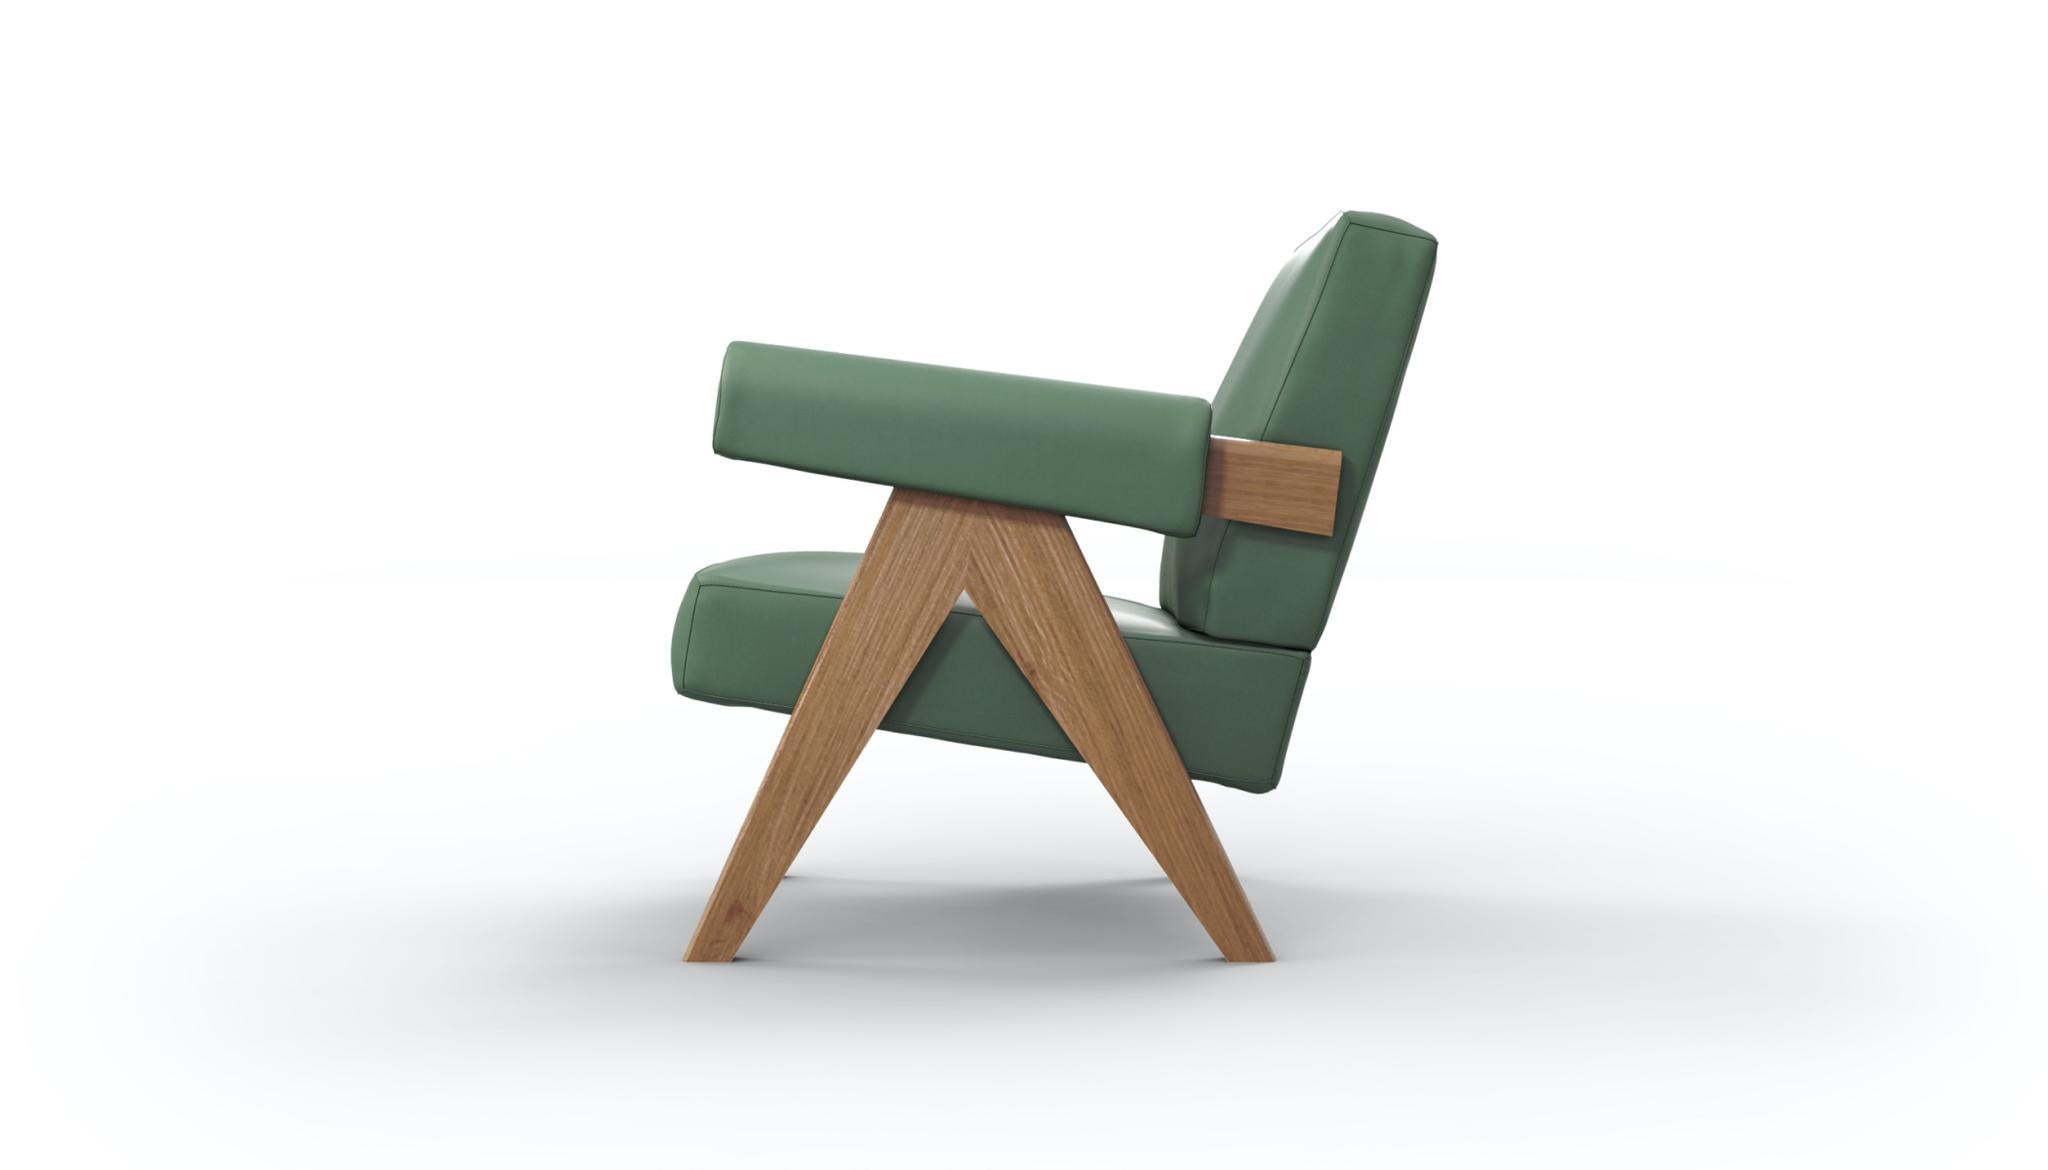 Armchair designed by Pierre Jeanneret circa 1950, relaunched in 2019.
Manufactured by Cassina in Italy.

Included in UNESCO’s 2016 Cultural Heritage list, the extraordinary architecture of Le Corbusier’s Capitol Complex, designed by Chandigarh in